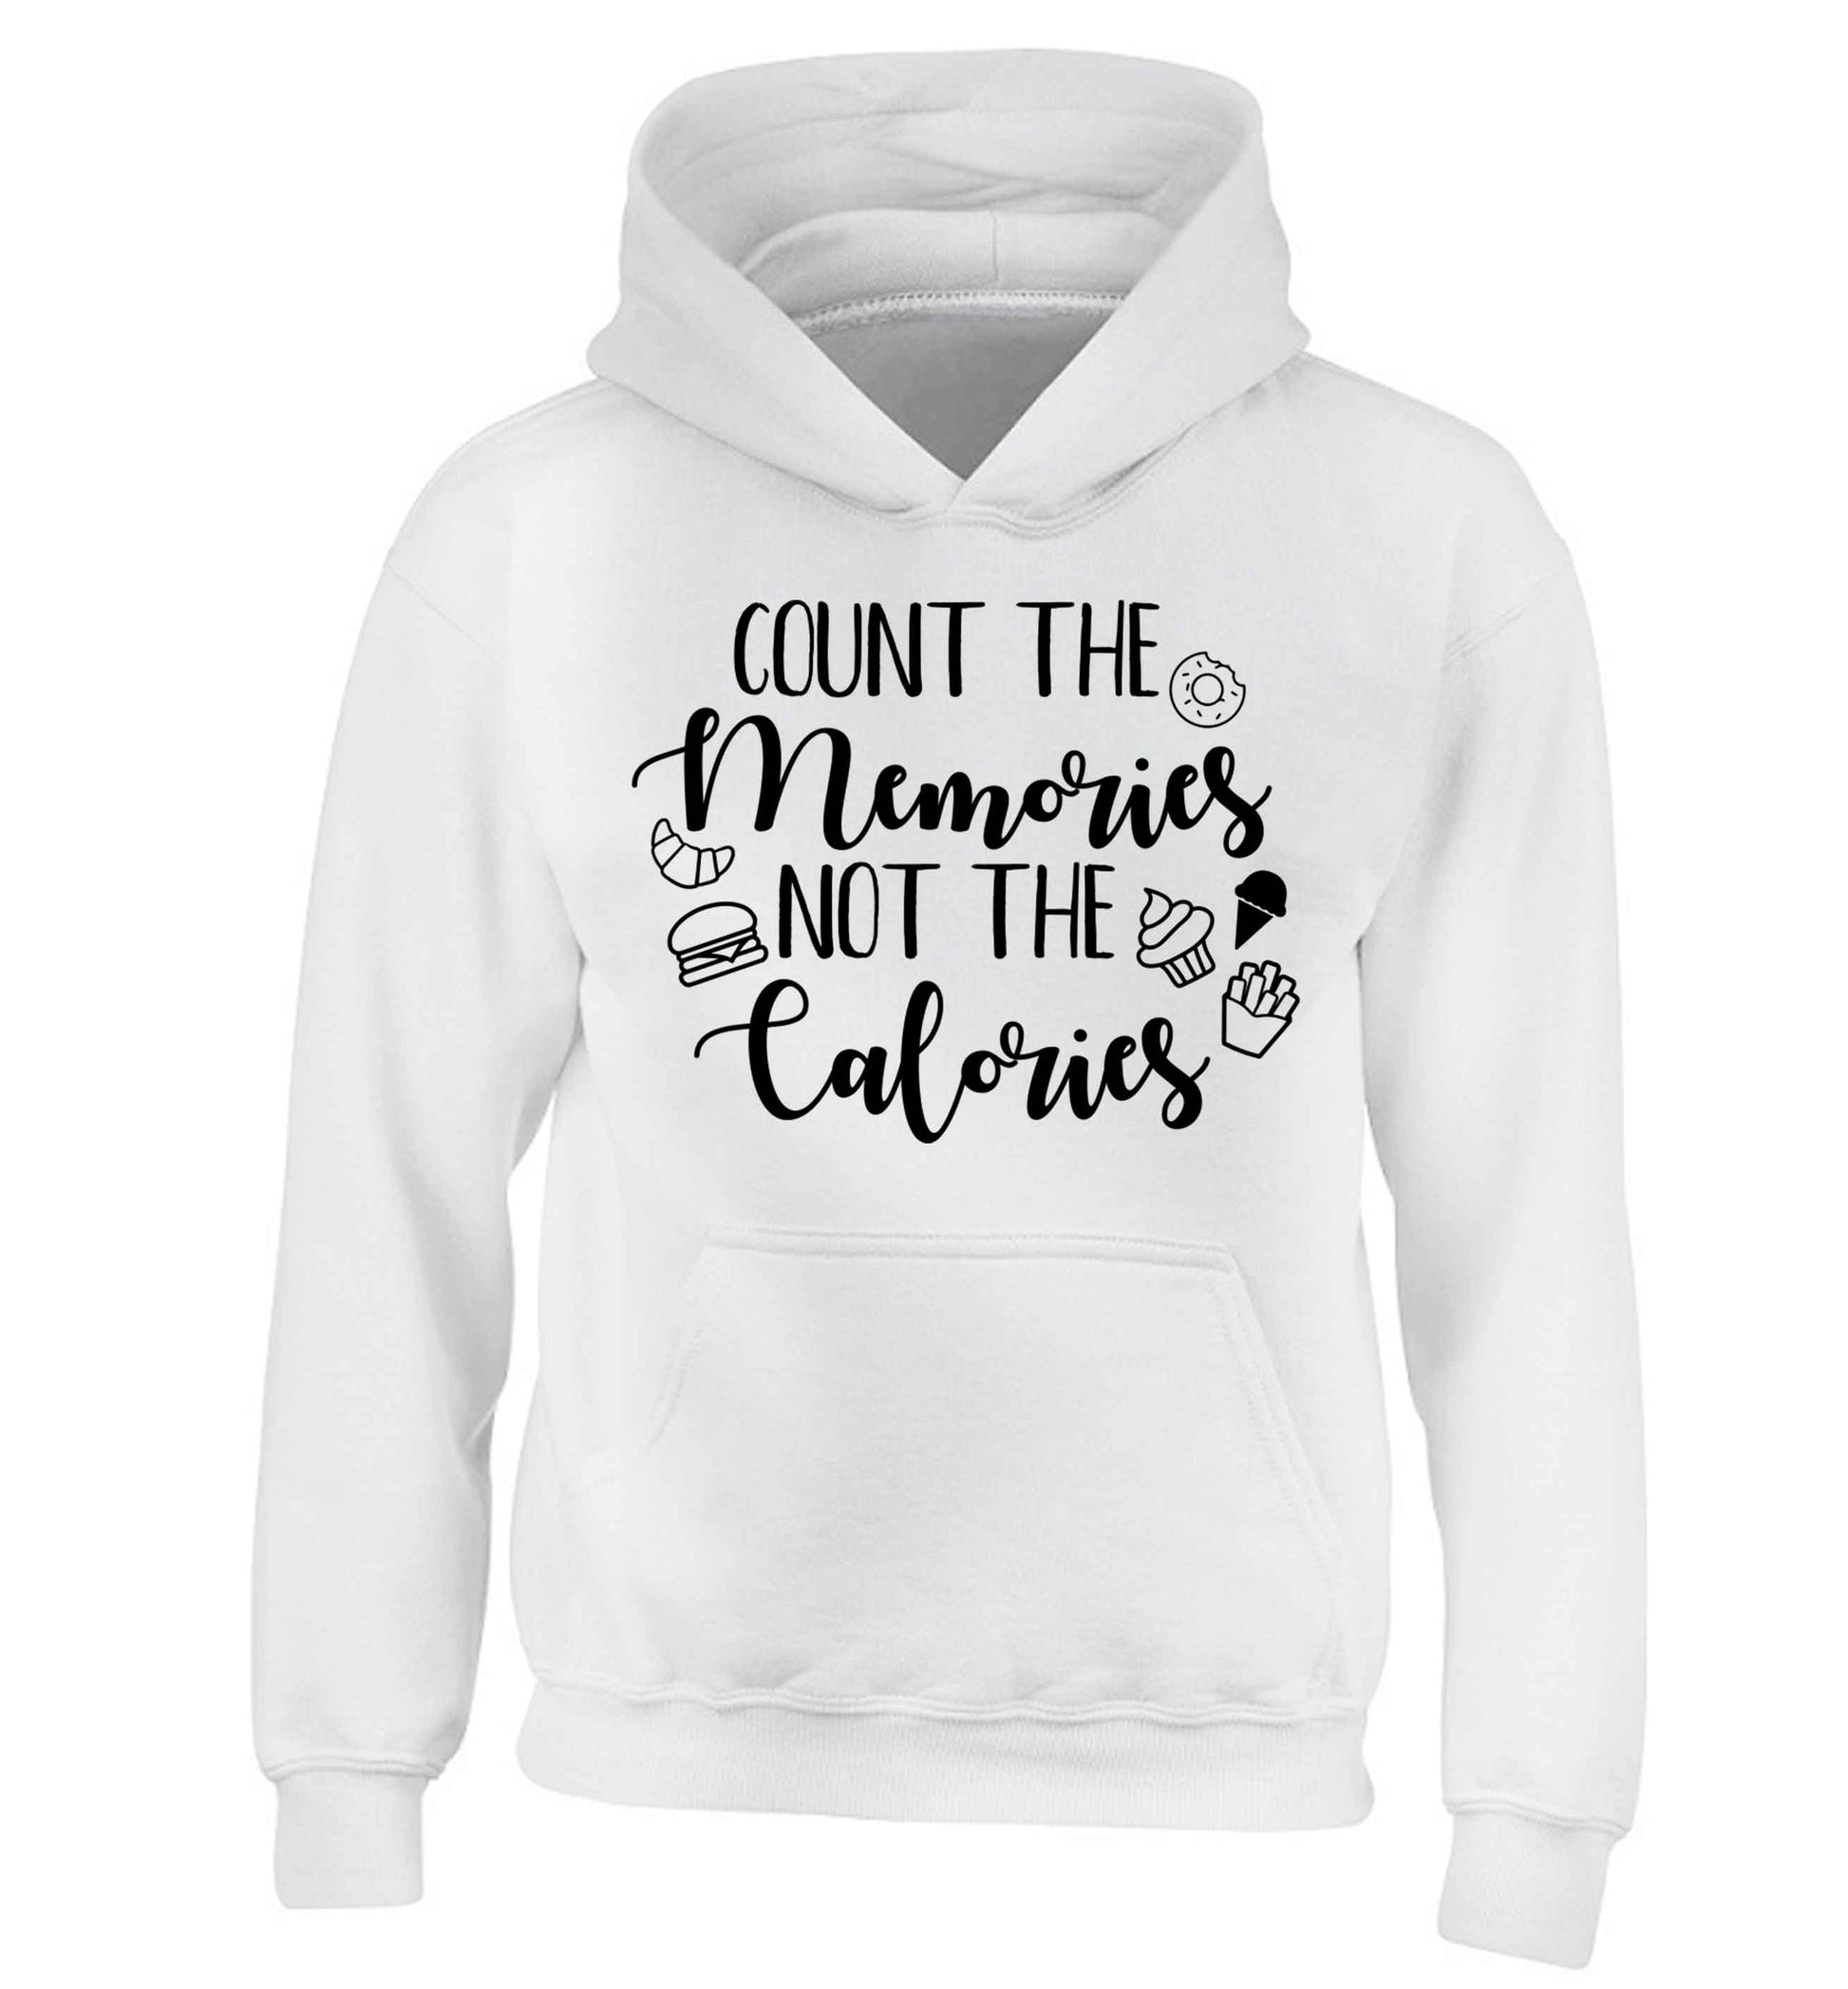 Count the memories not the calories children's white hoodie 12-13 Years